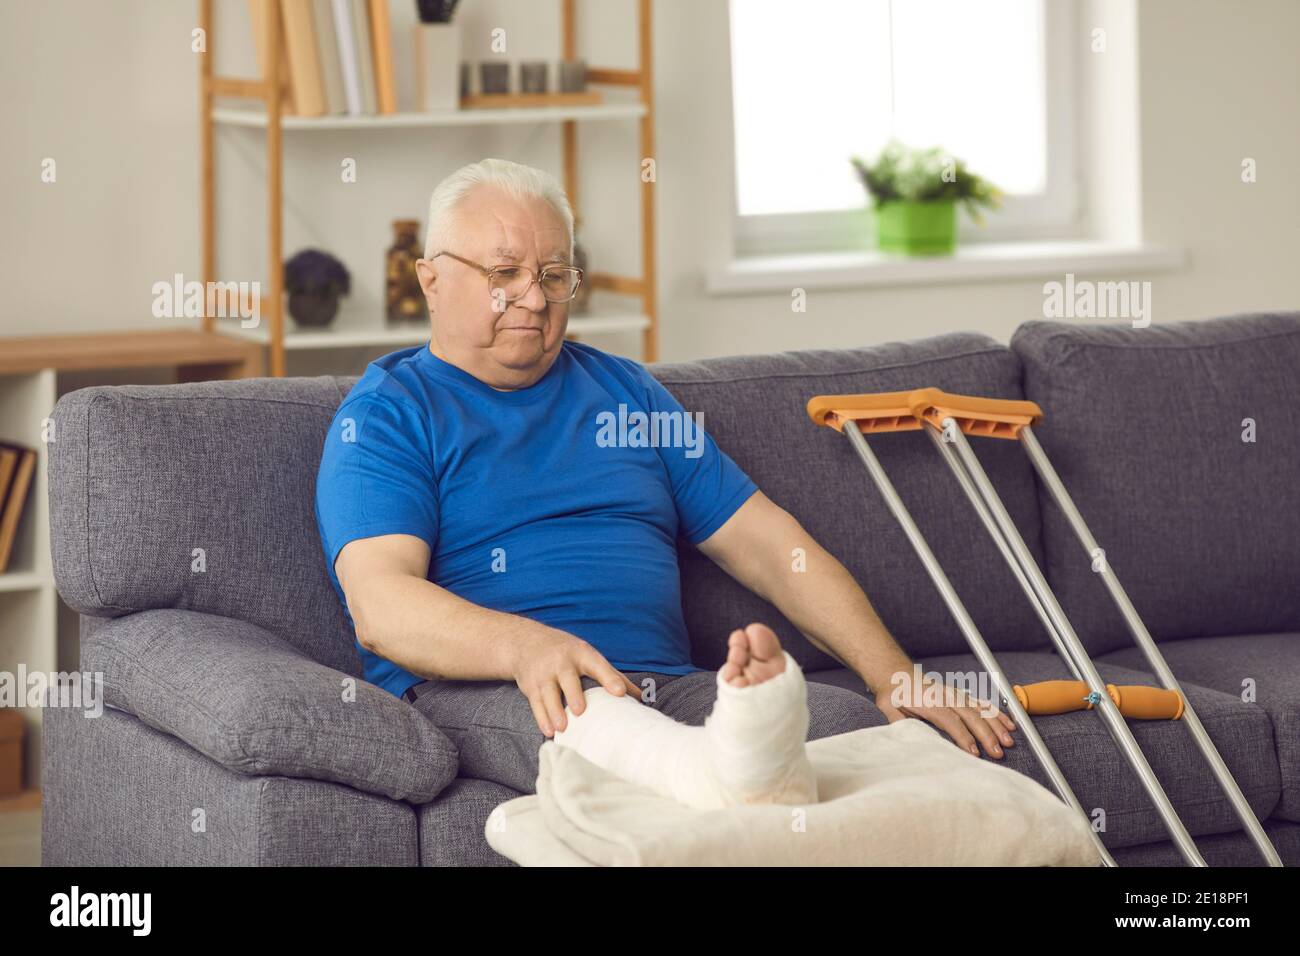 Senior man with broken leg stays at home and waits for his bone fracture to heal Stock Photo